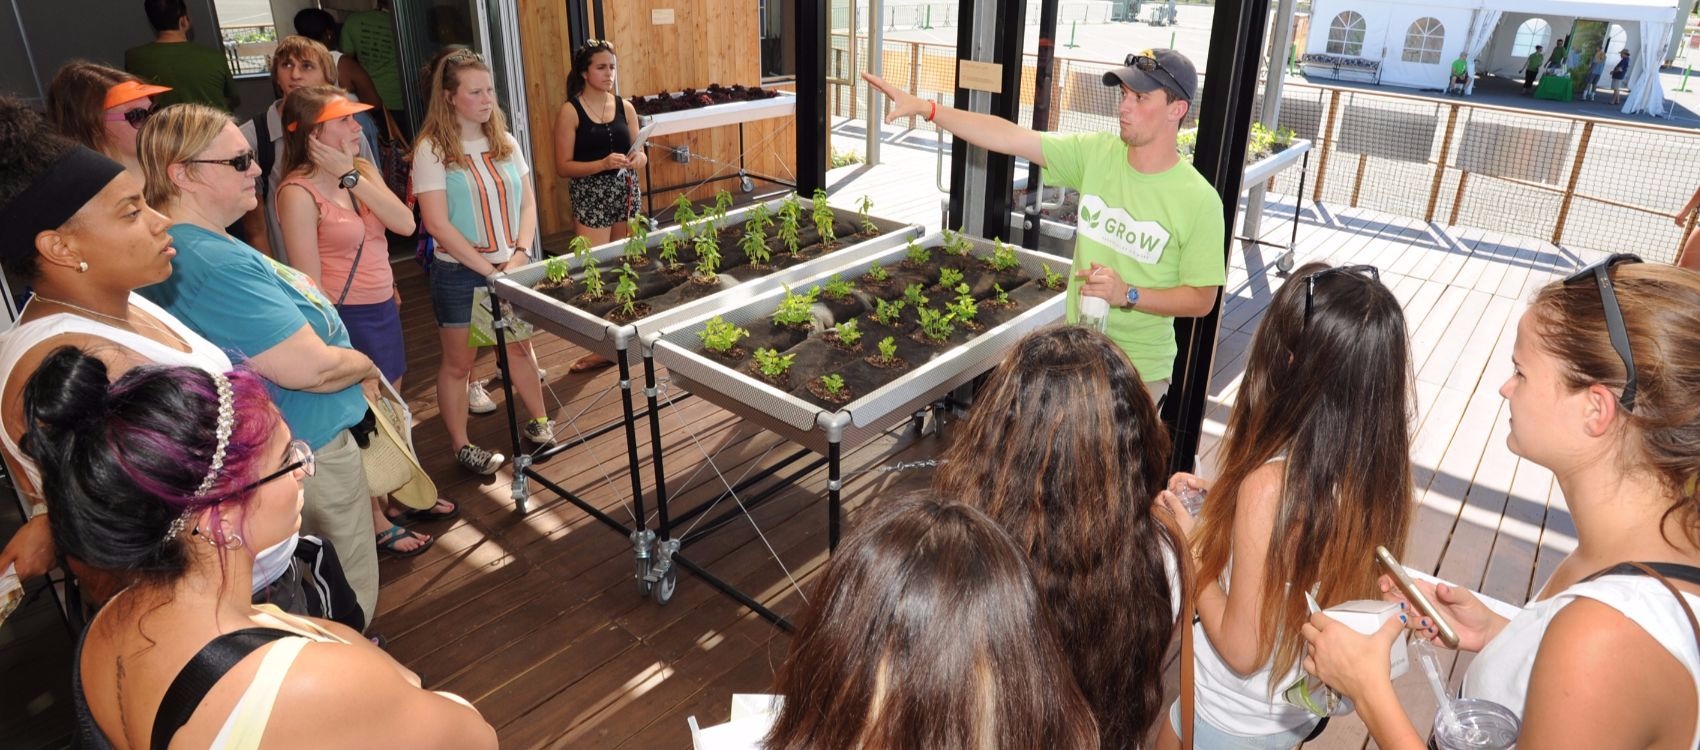 Photo of a young man, a student with the University at Buffalo, U.S. Department of Energy Solar Decathlon 2015 team, providing a tour of the solarium, a glass walled and roofed sun room, of his teams's competition house to a group of visitors. He is gesturing with his hand next to two indoor garden beds with vegetable plants.